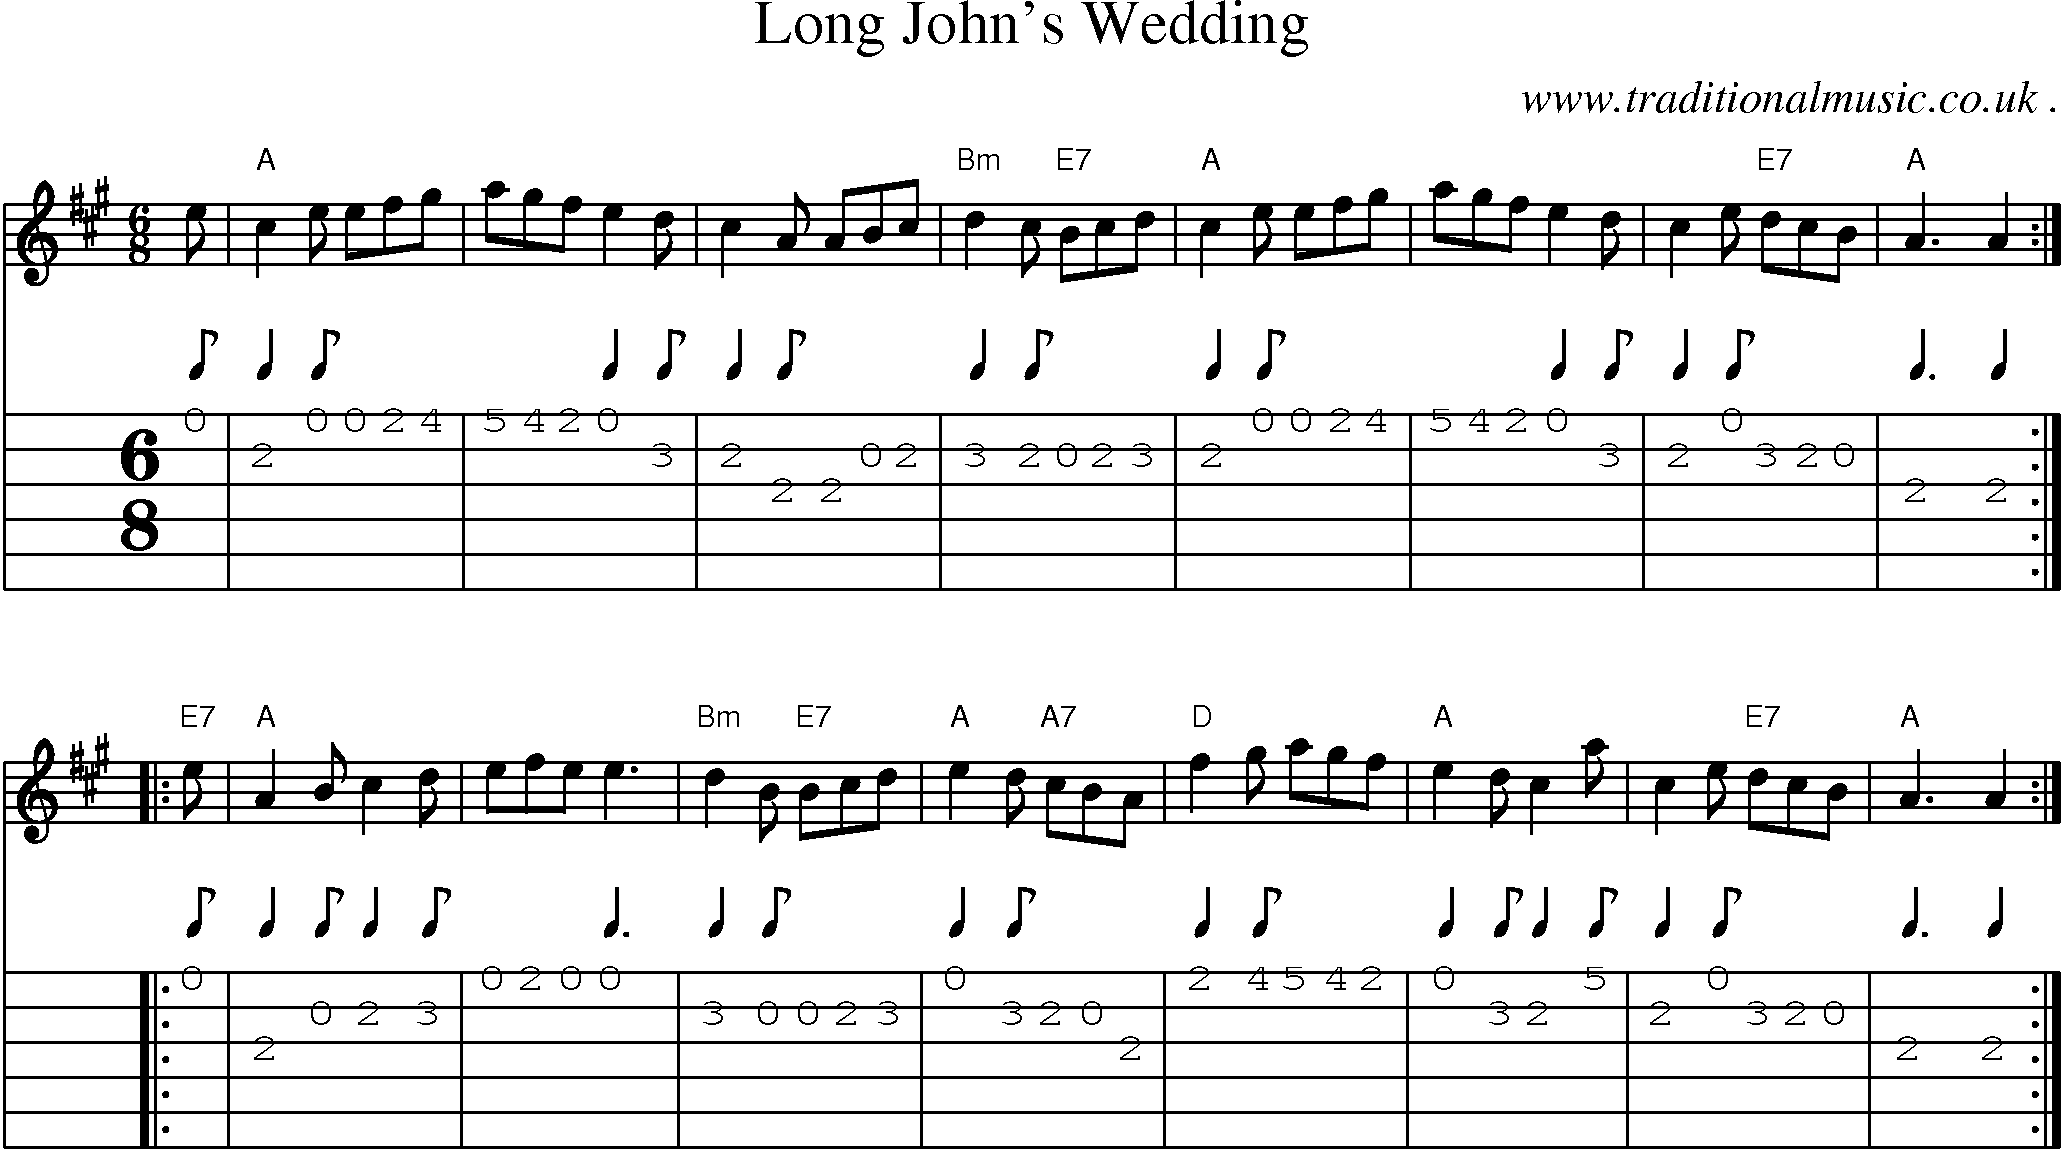 Sheet-music  score, Chords and Guitar Tabs for Long Johns Wedding